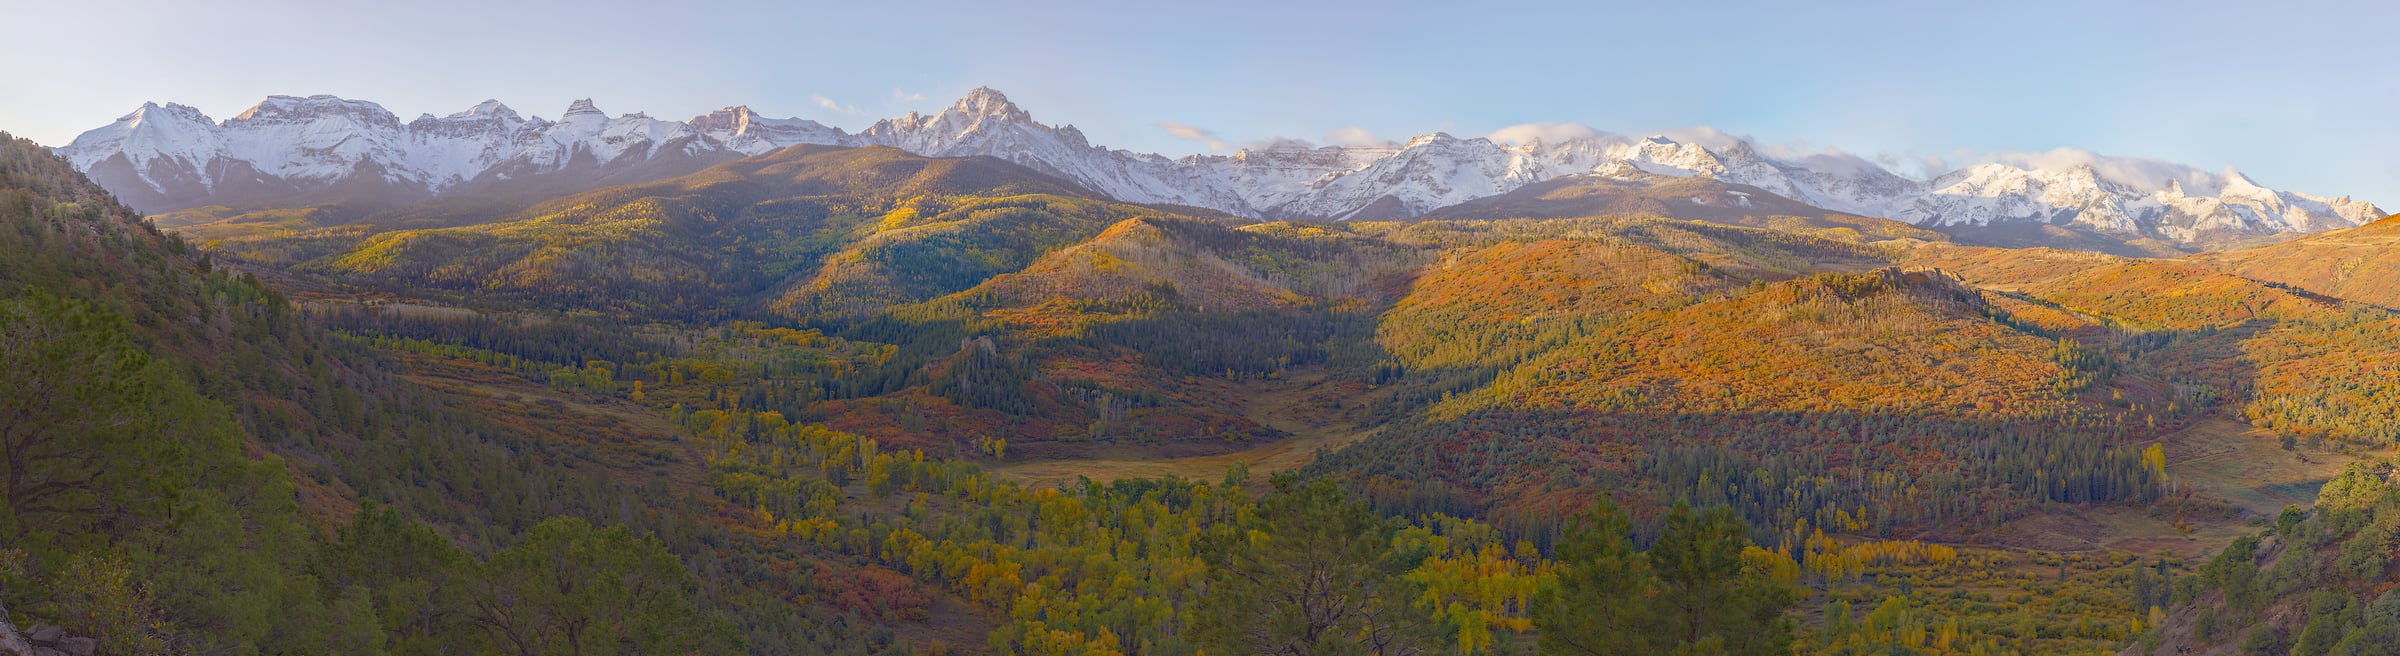 1,063 megapixels! A very high resolution, large-format VAST photo print of snow-covered mountains and a valley filled with trees and autumn foliage; gigapixel landscape photograph created by John Freeman in County Rd 5, Ridgway, Colorado.